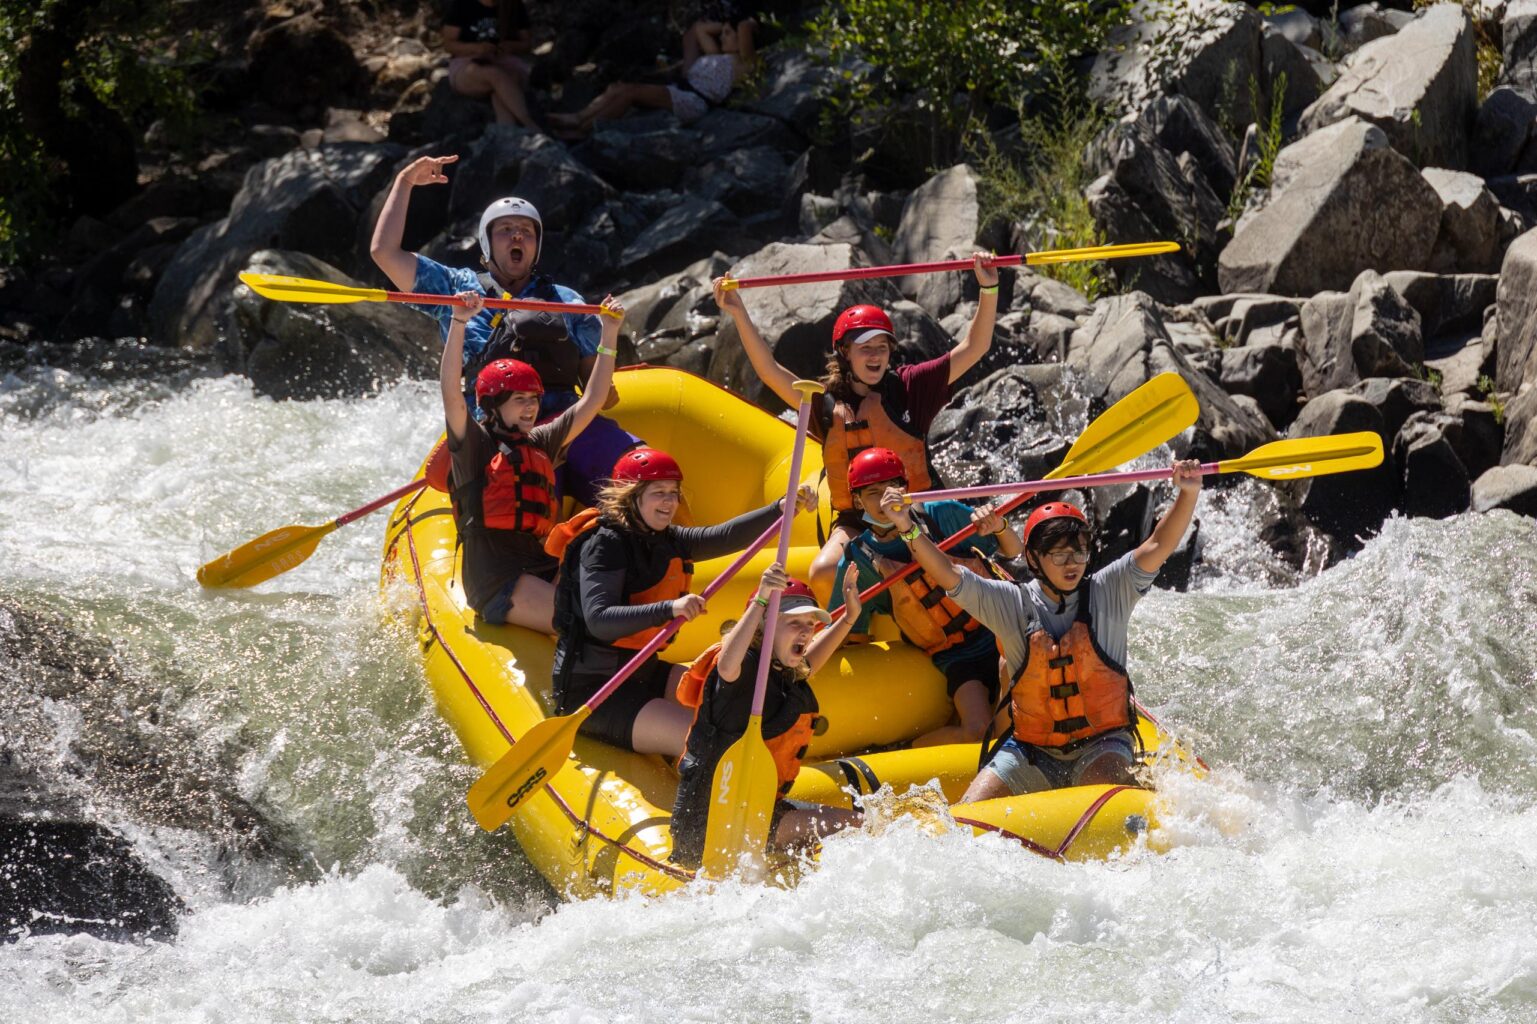 An OARS raft goes down Troublemaker rapid on the South Fork of the American River.